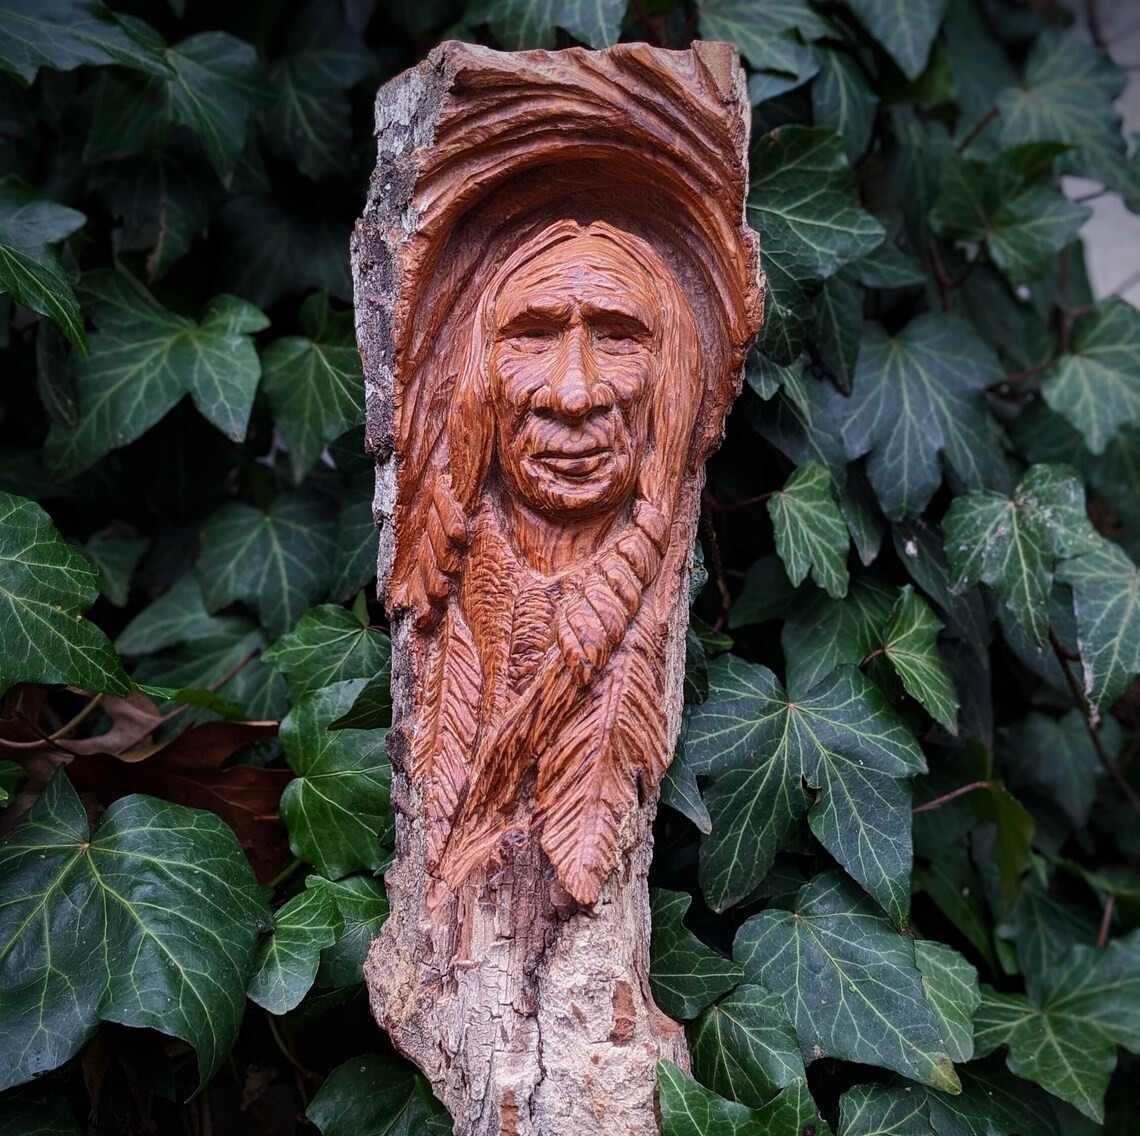 Where Wood Whispers, The Remarkable Sculptures Of Tom Wilkinson (2)